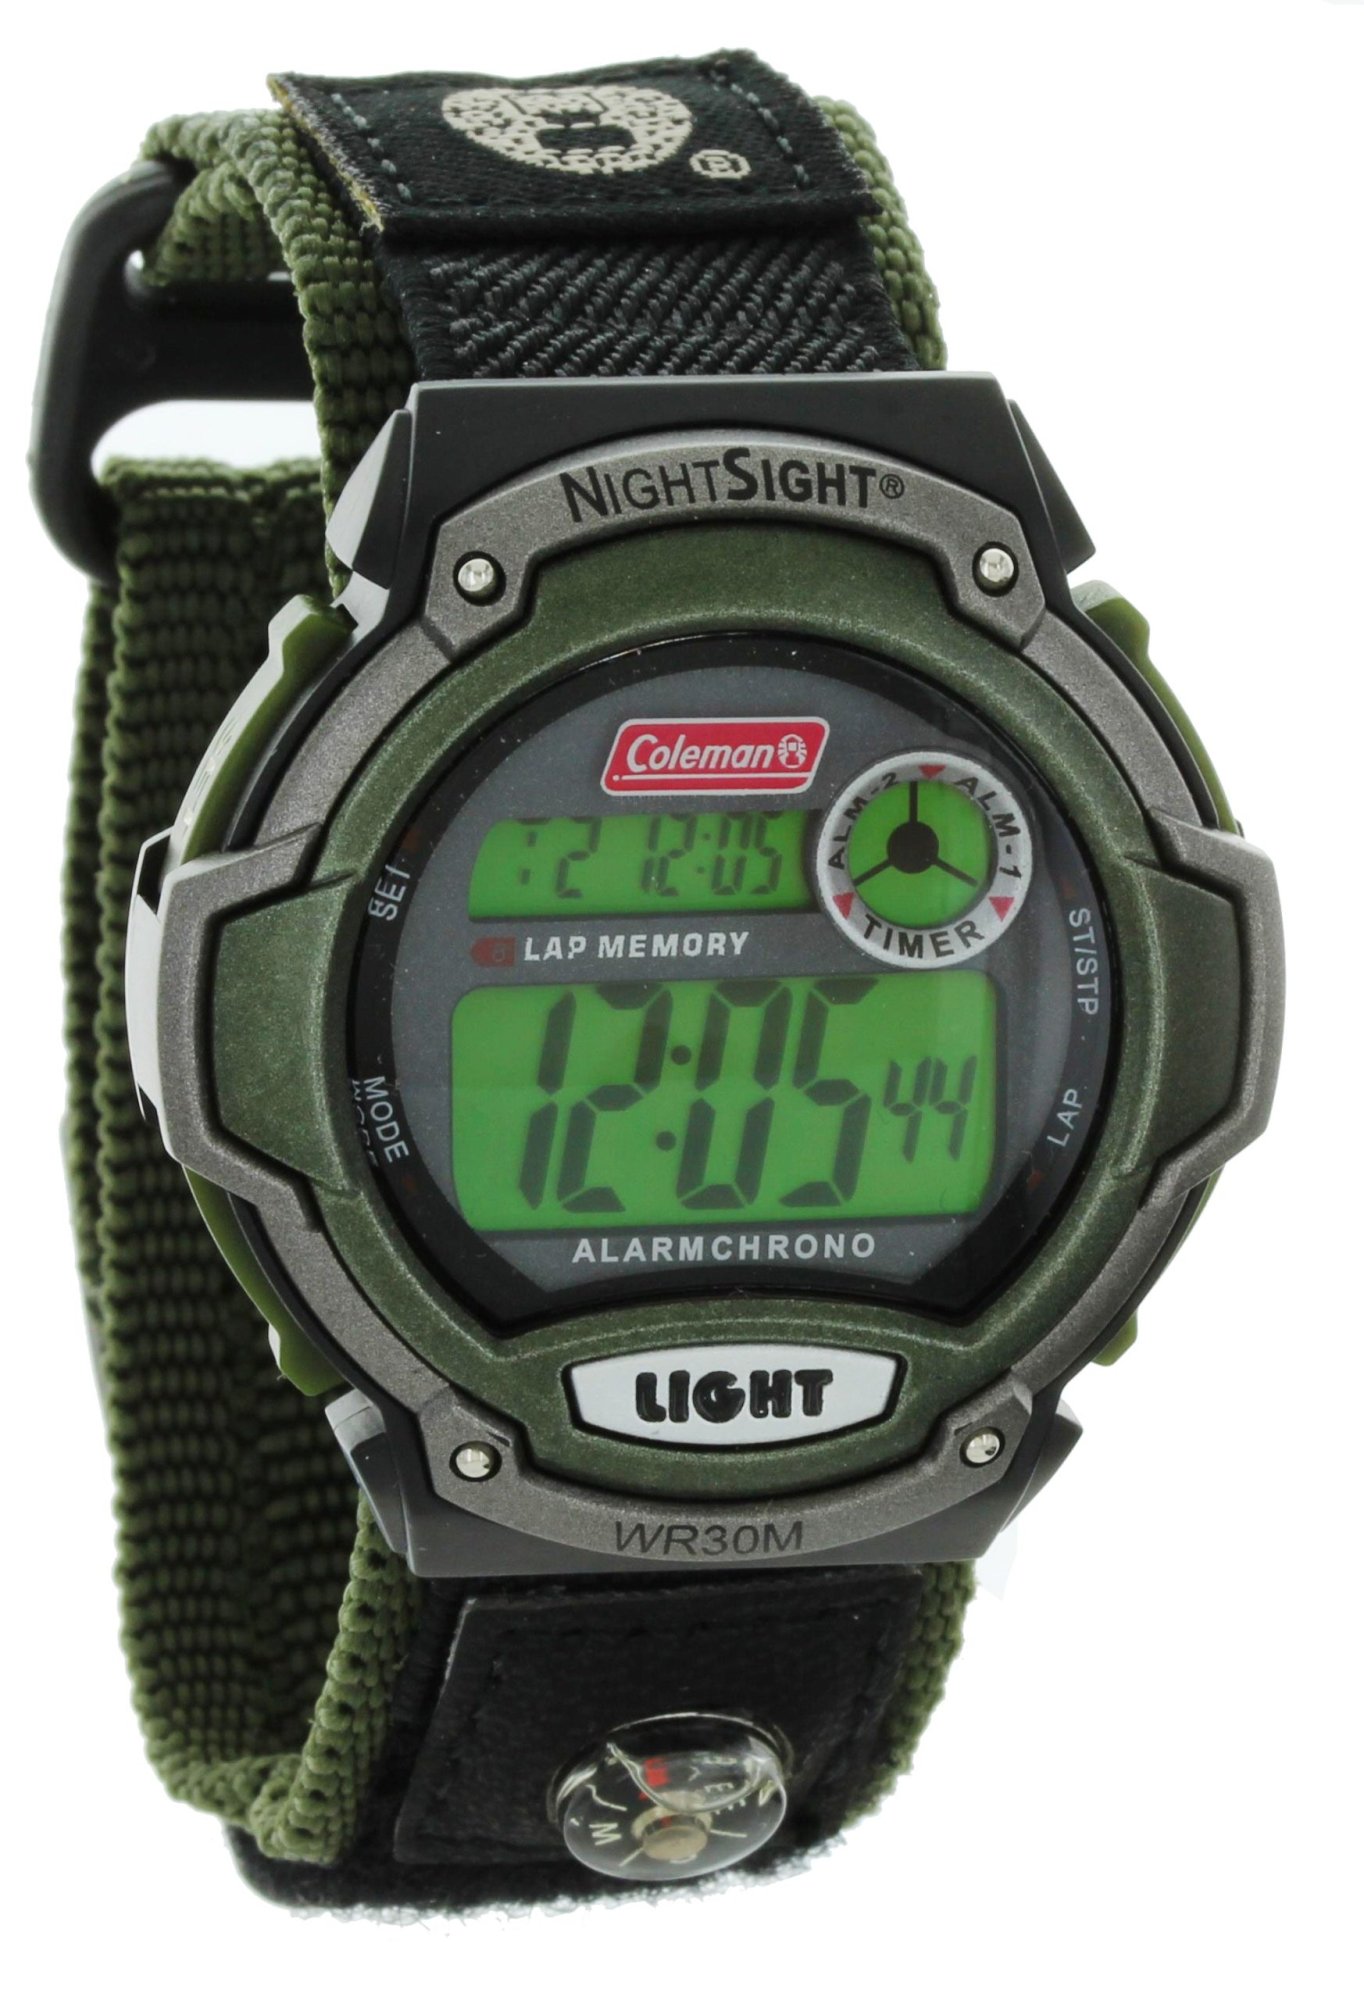 Model: Coleman Men's Digital Dual Time Water Resistant Sport Watch with Night Sight